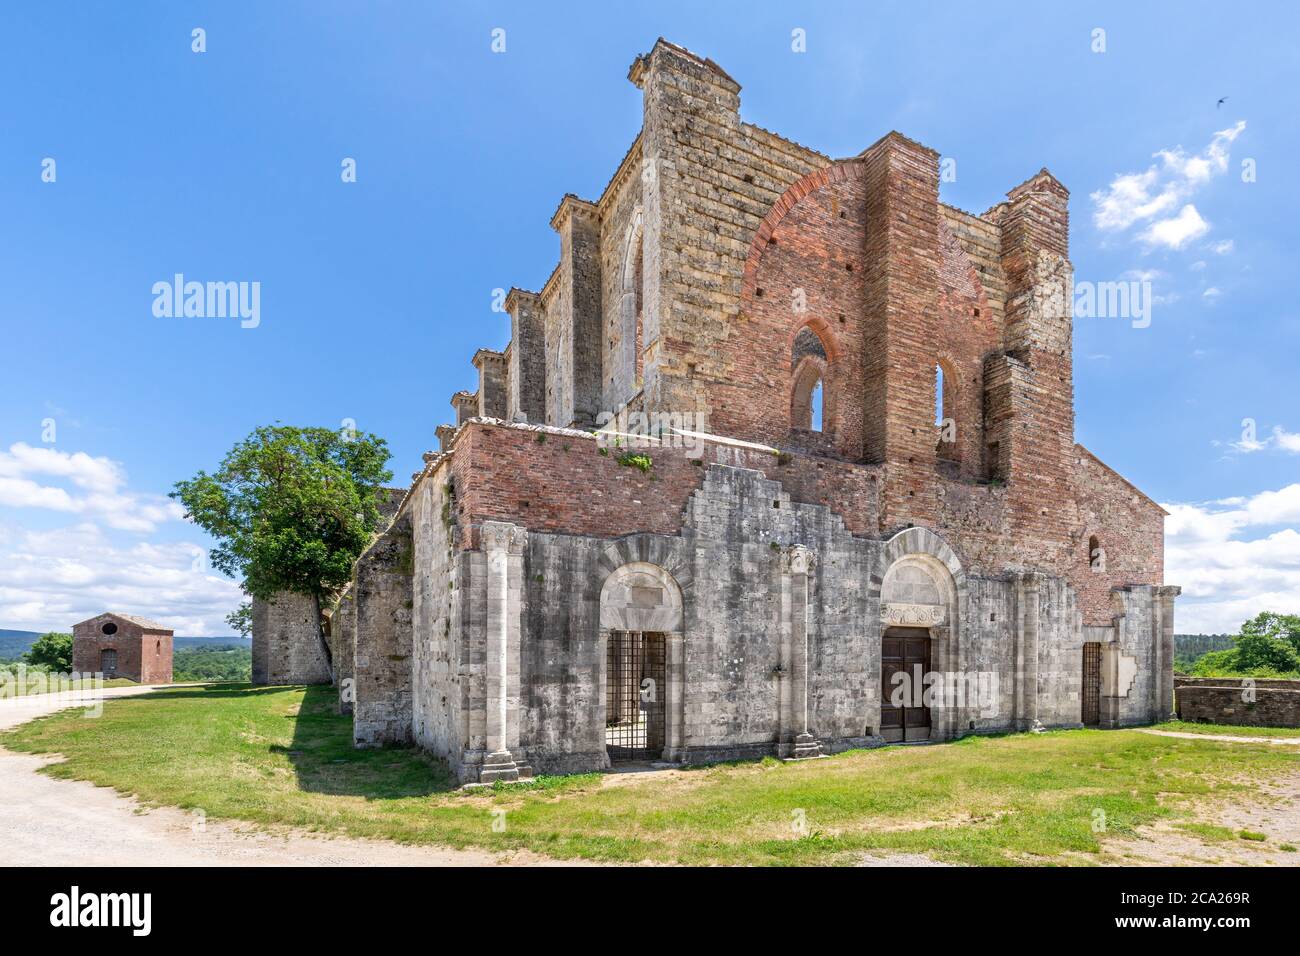 Wide angle view of the exterior of an ancient and abandoned Tuscanian gothic cathedral, with a tree growing on its side, under a blue summer sky Stock Photo